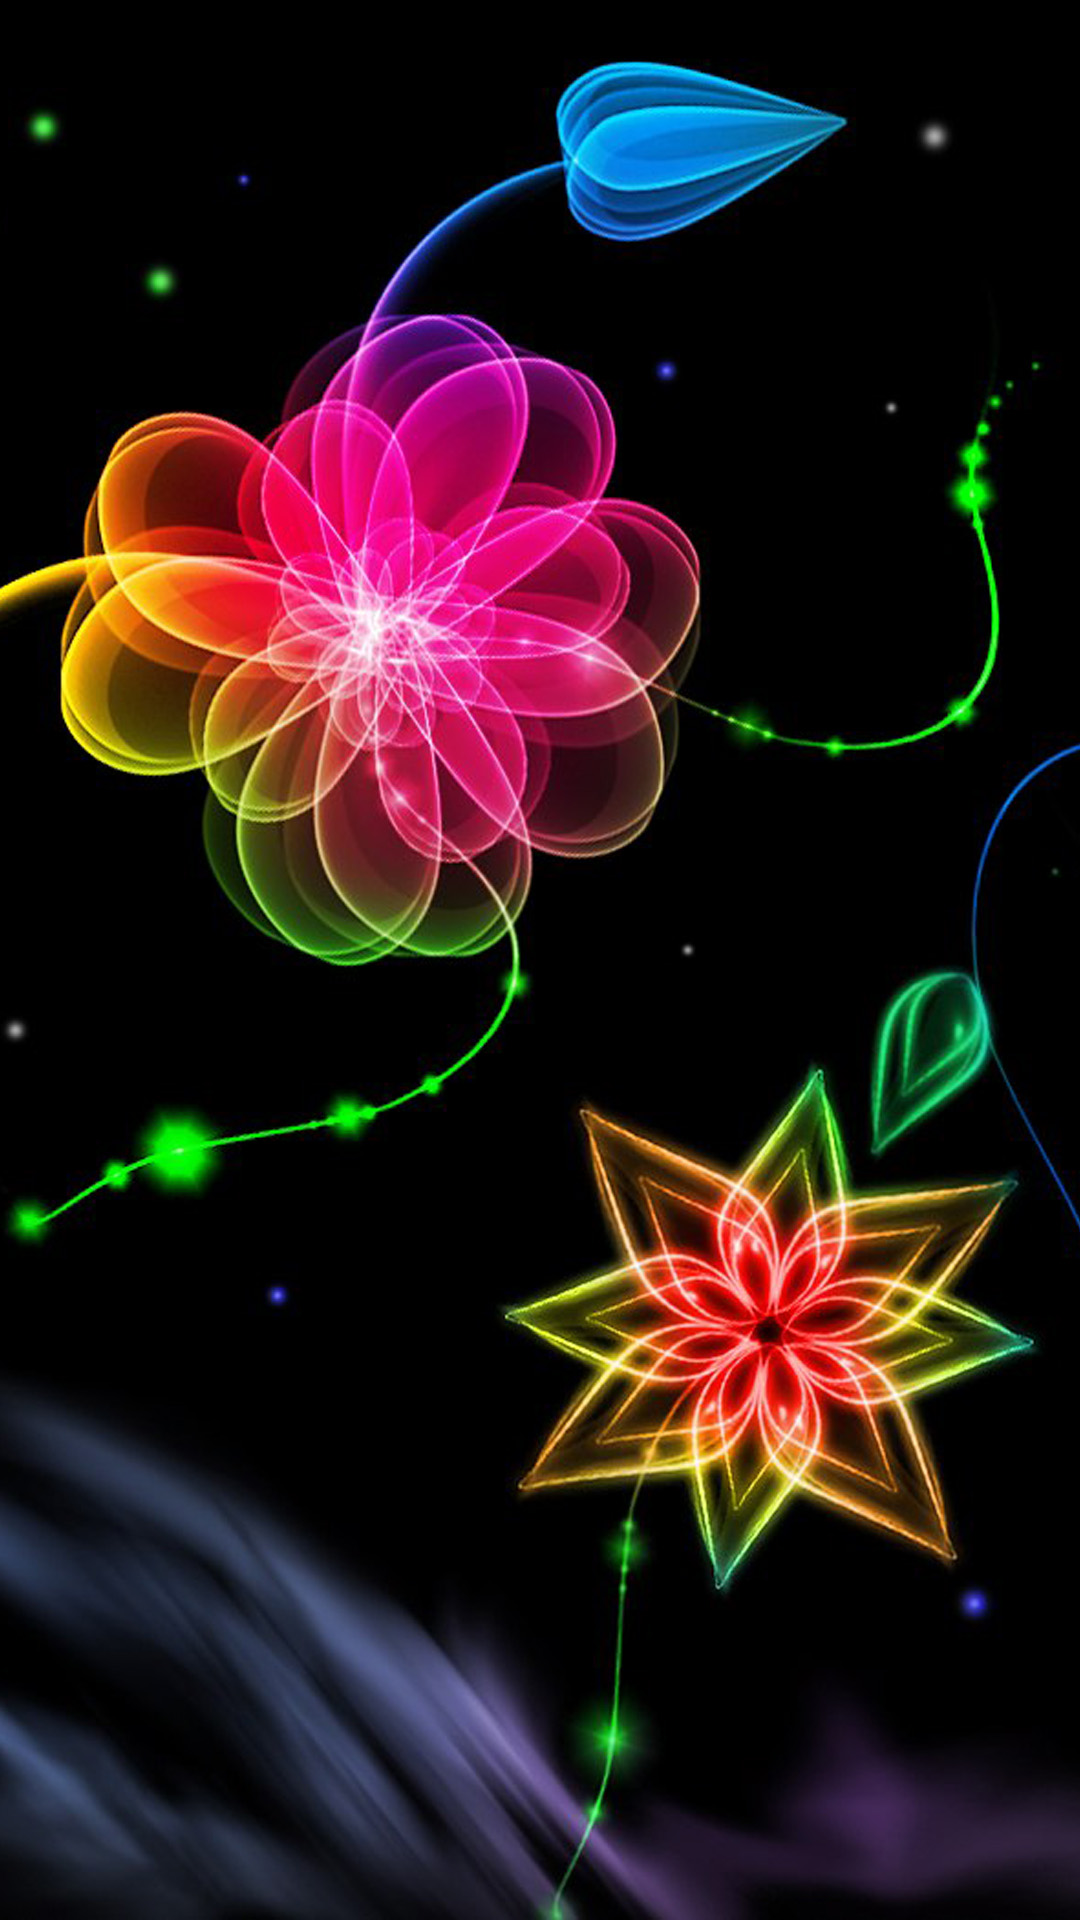 3d Space Flower For Iphone 6 Plus Wallpaper Iphone 6 Plus Wallpaper Iphone11 スマホ壁紙 待受画像ギャラリー